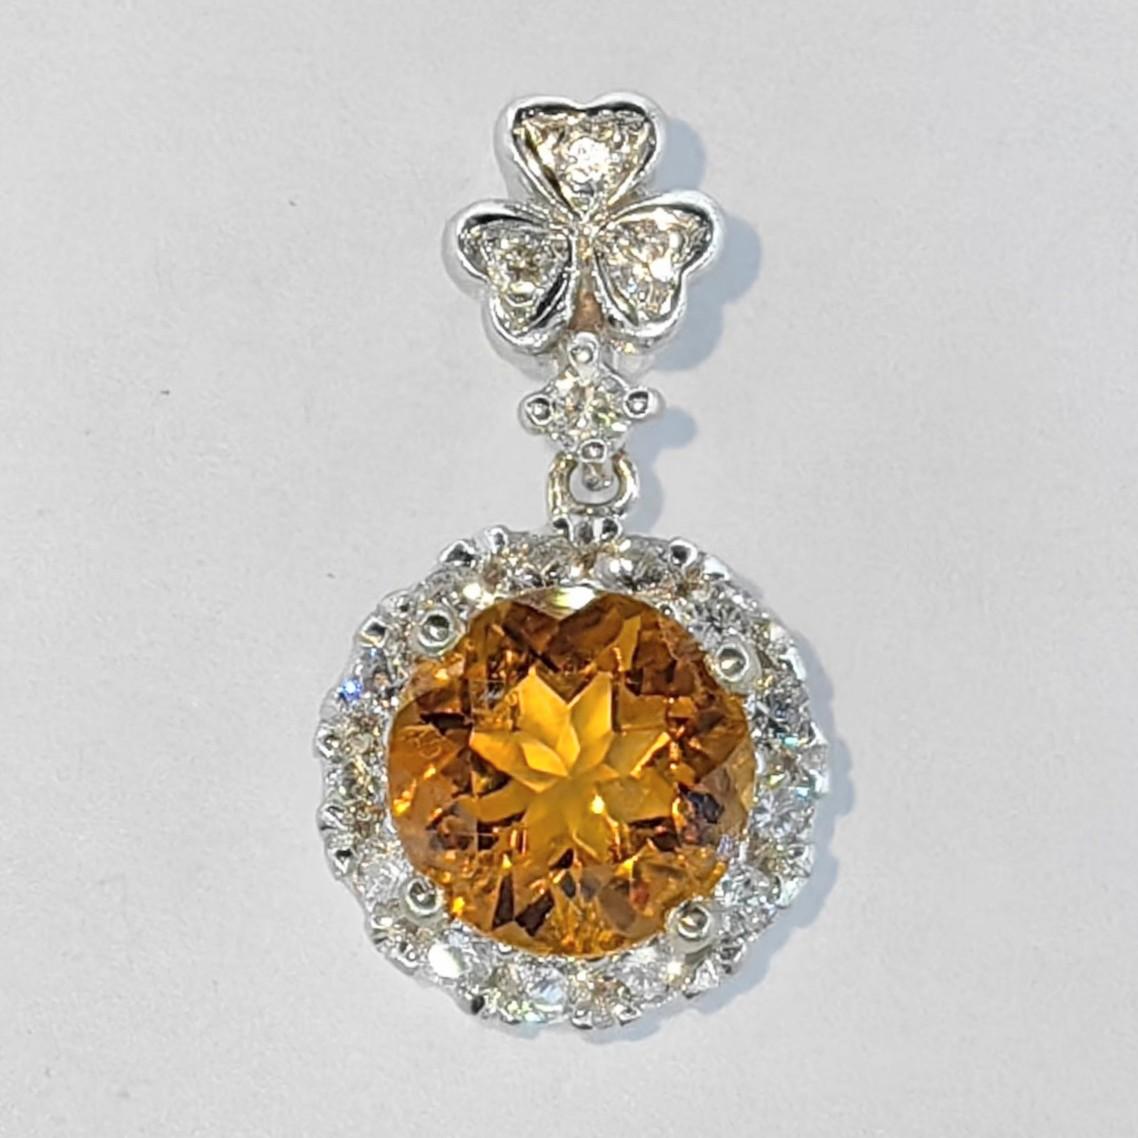 Introducing our exquisite 1.30 Carat Intense Golden Orange Citrine Diamond 18K White Gold Necklace Pendant, a captivating piece that radiates warmth and sophistication.

At the heart of this pendant lies a round-cut intense golden orange citrine